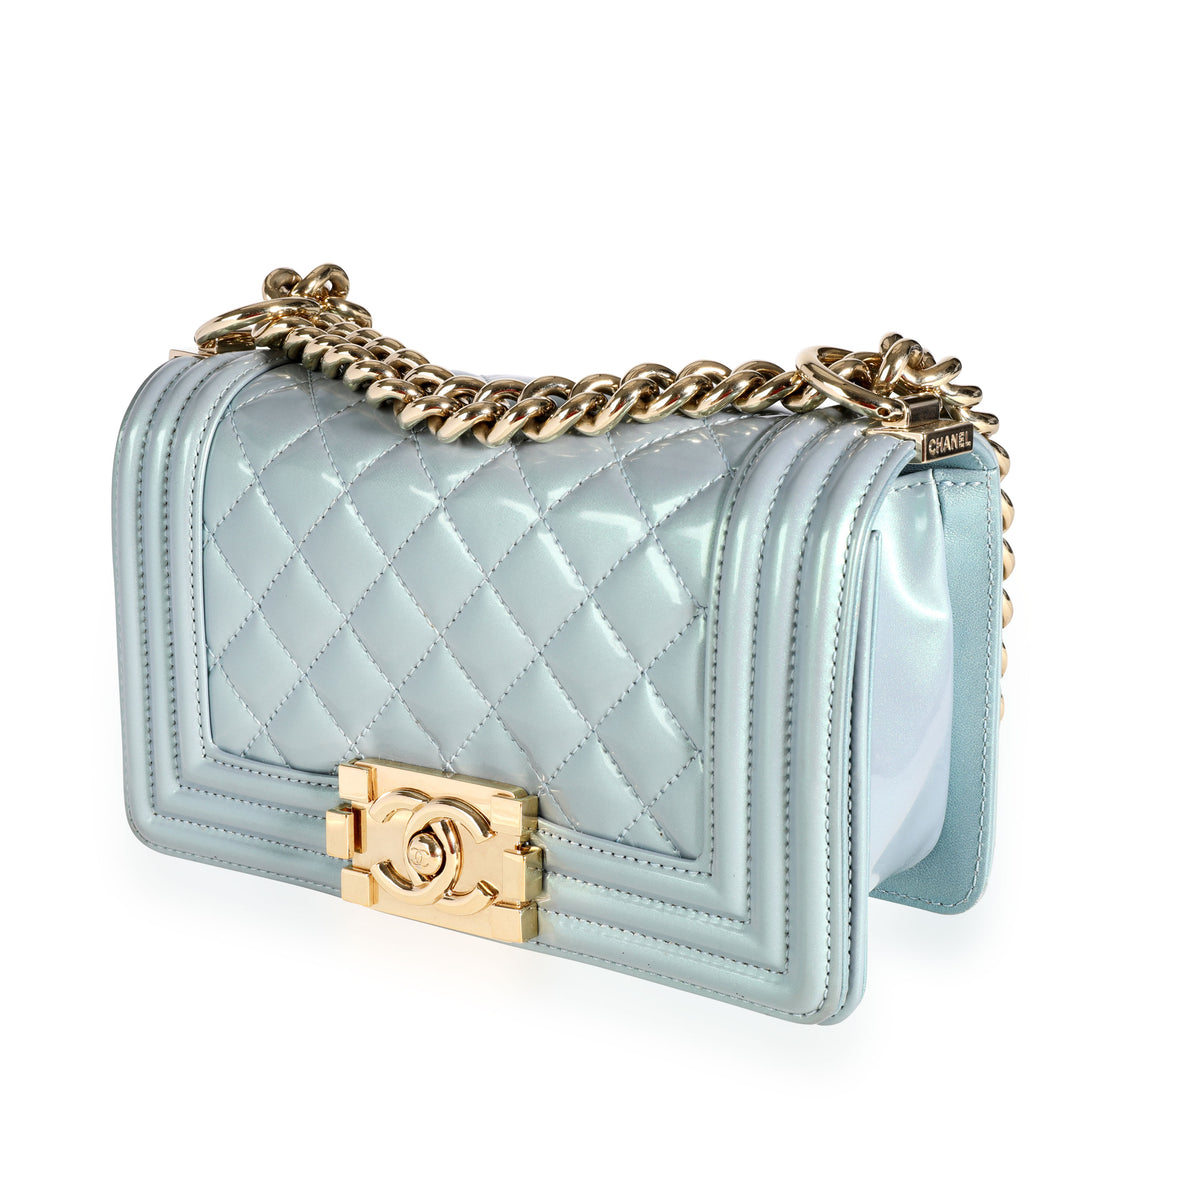 Chanel Iridescent Light Blue Patent Leather Small Boy Bag by WP